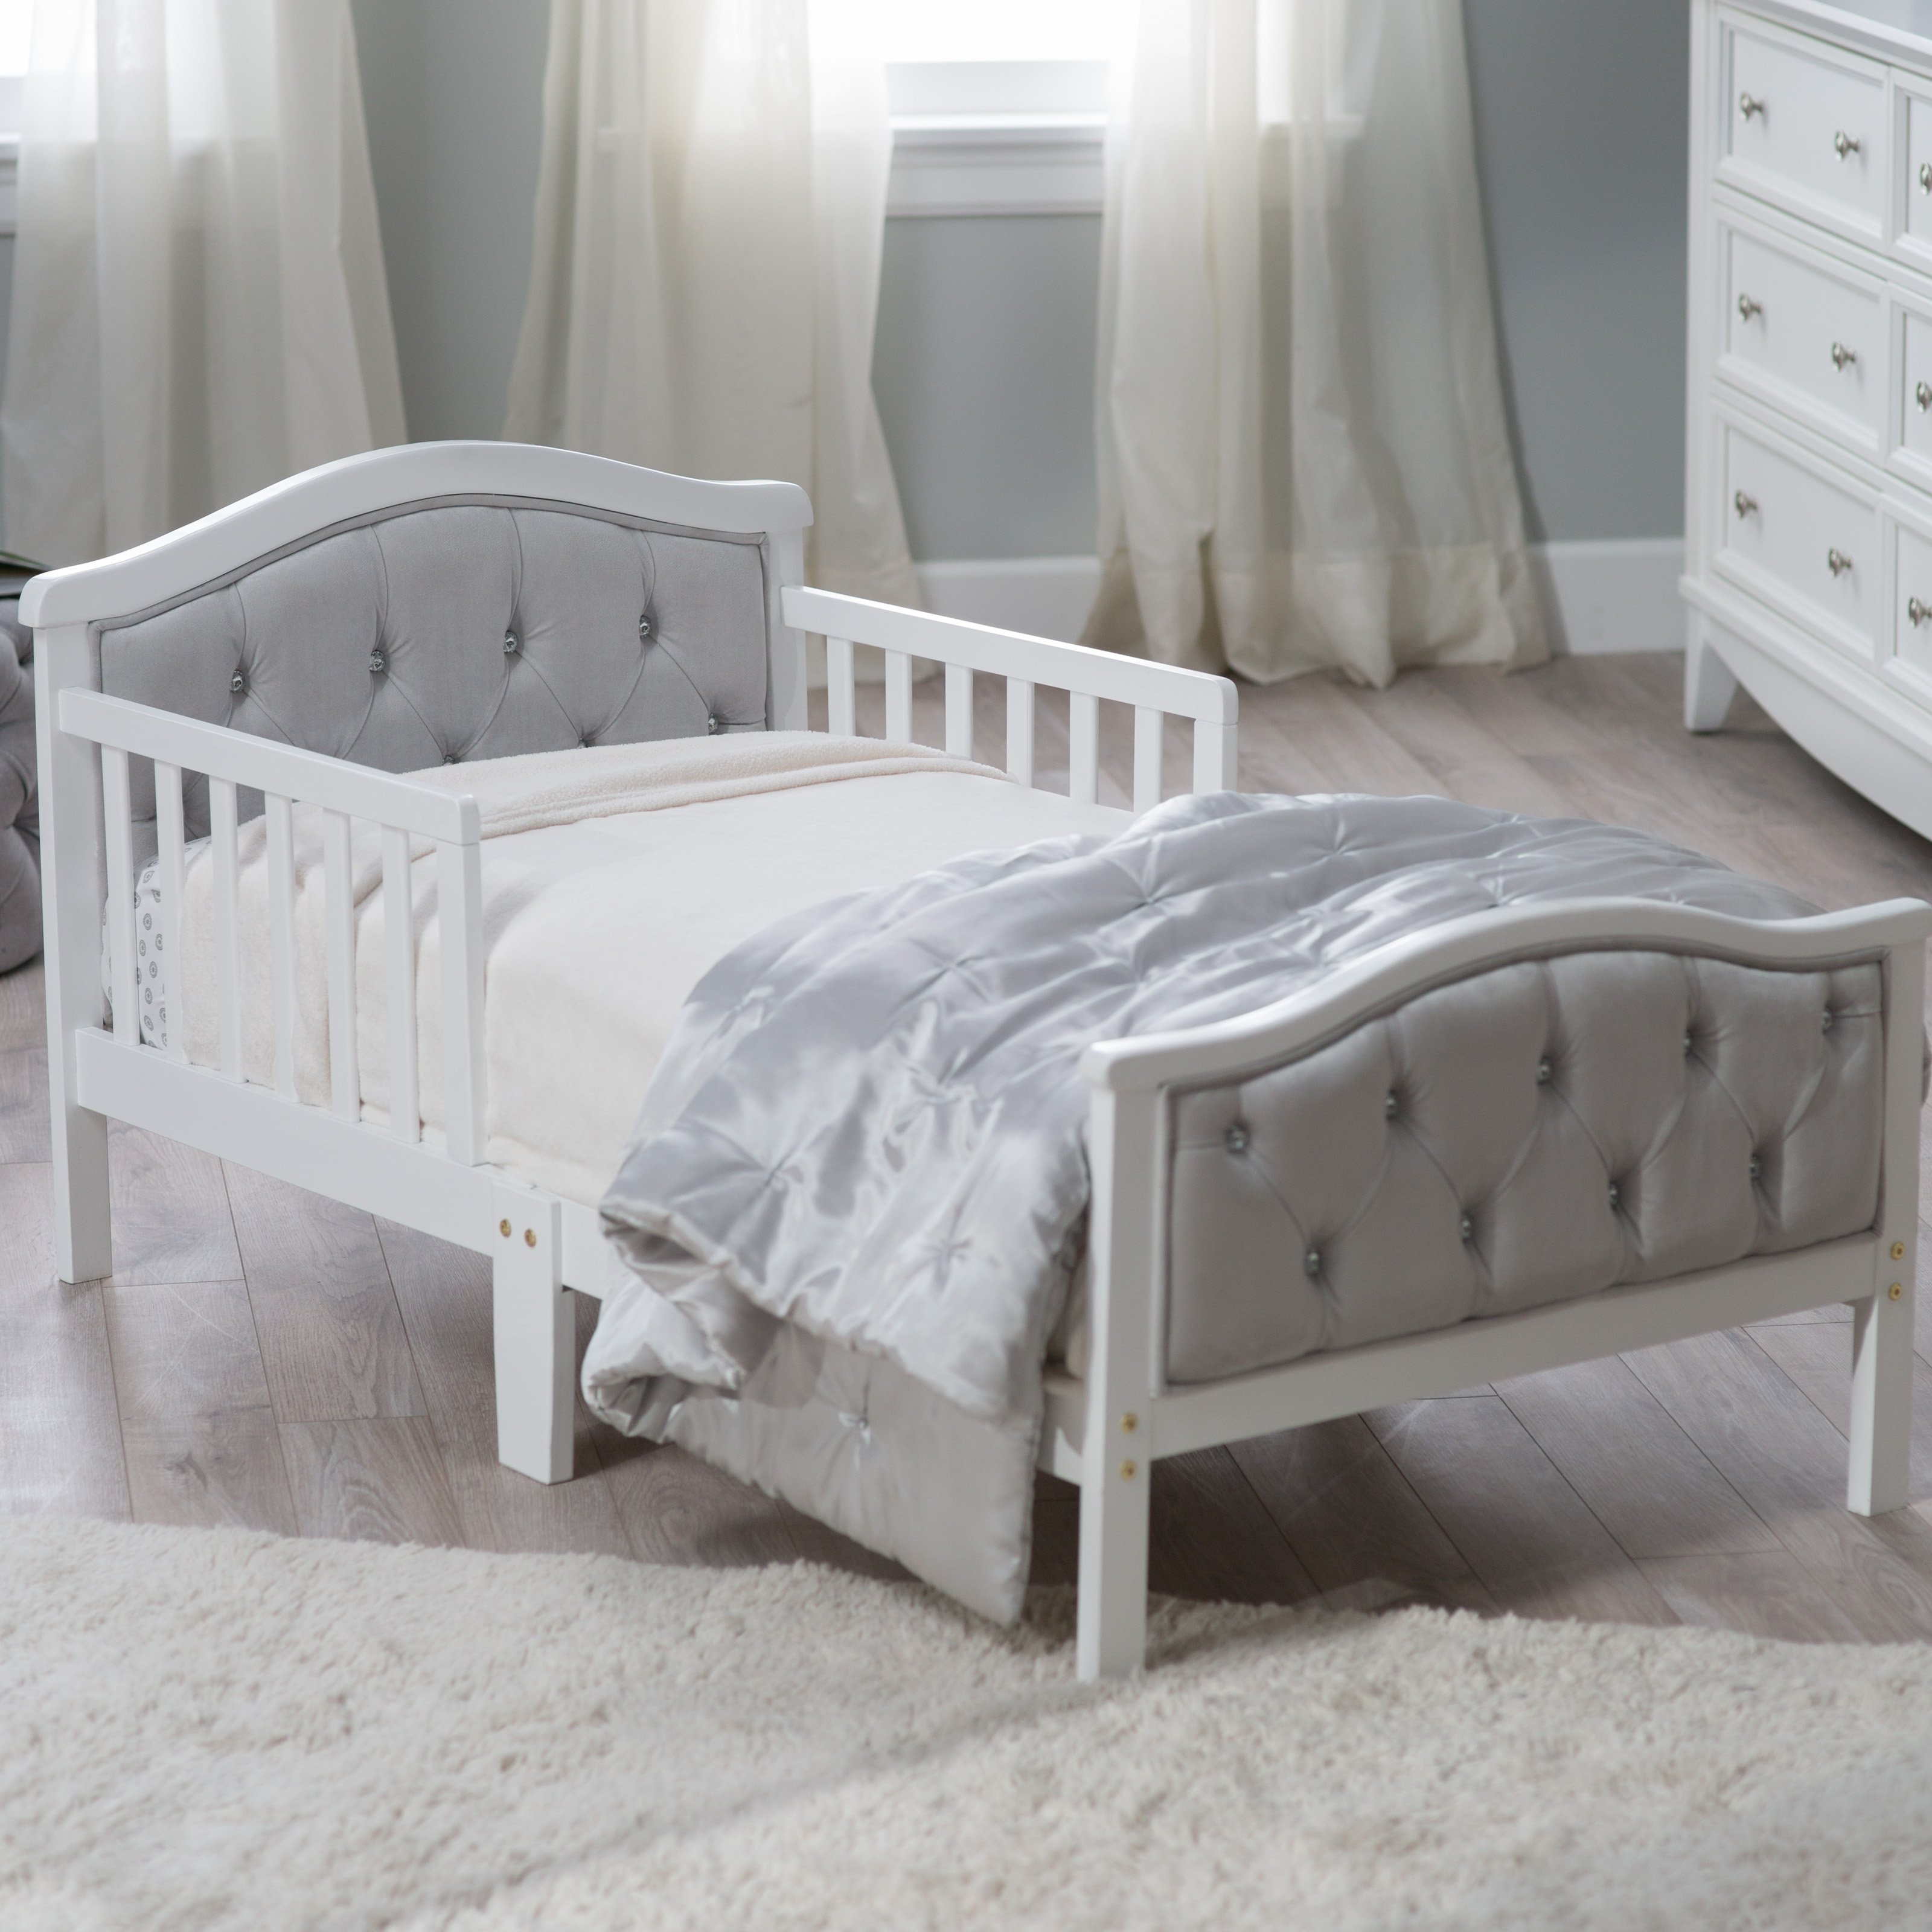 toddler beds orbelle upholstered toddler bed - gray/french white | hayneedle IQVWKYP